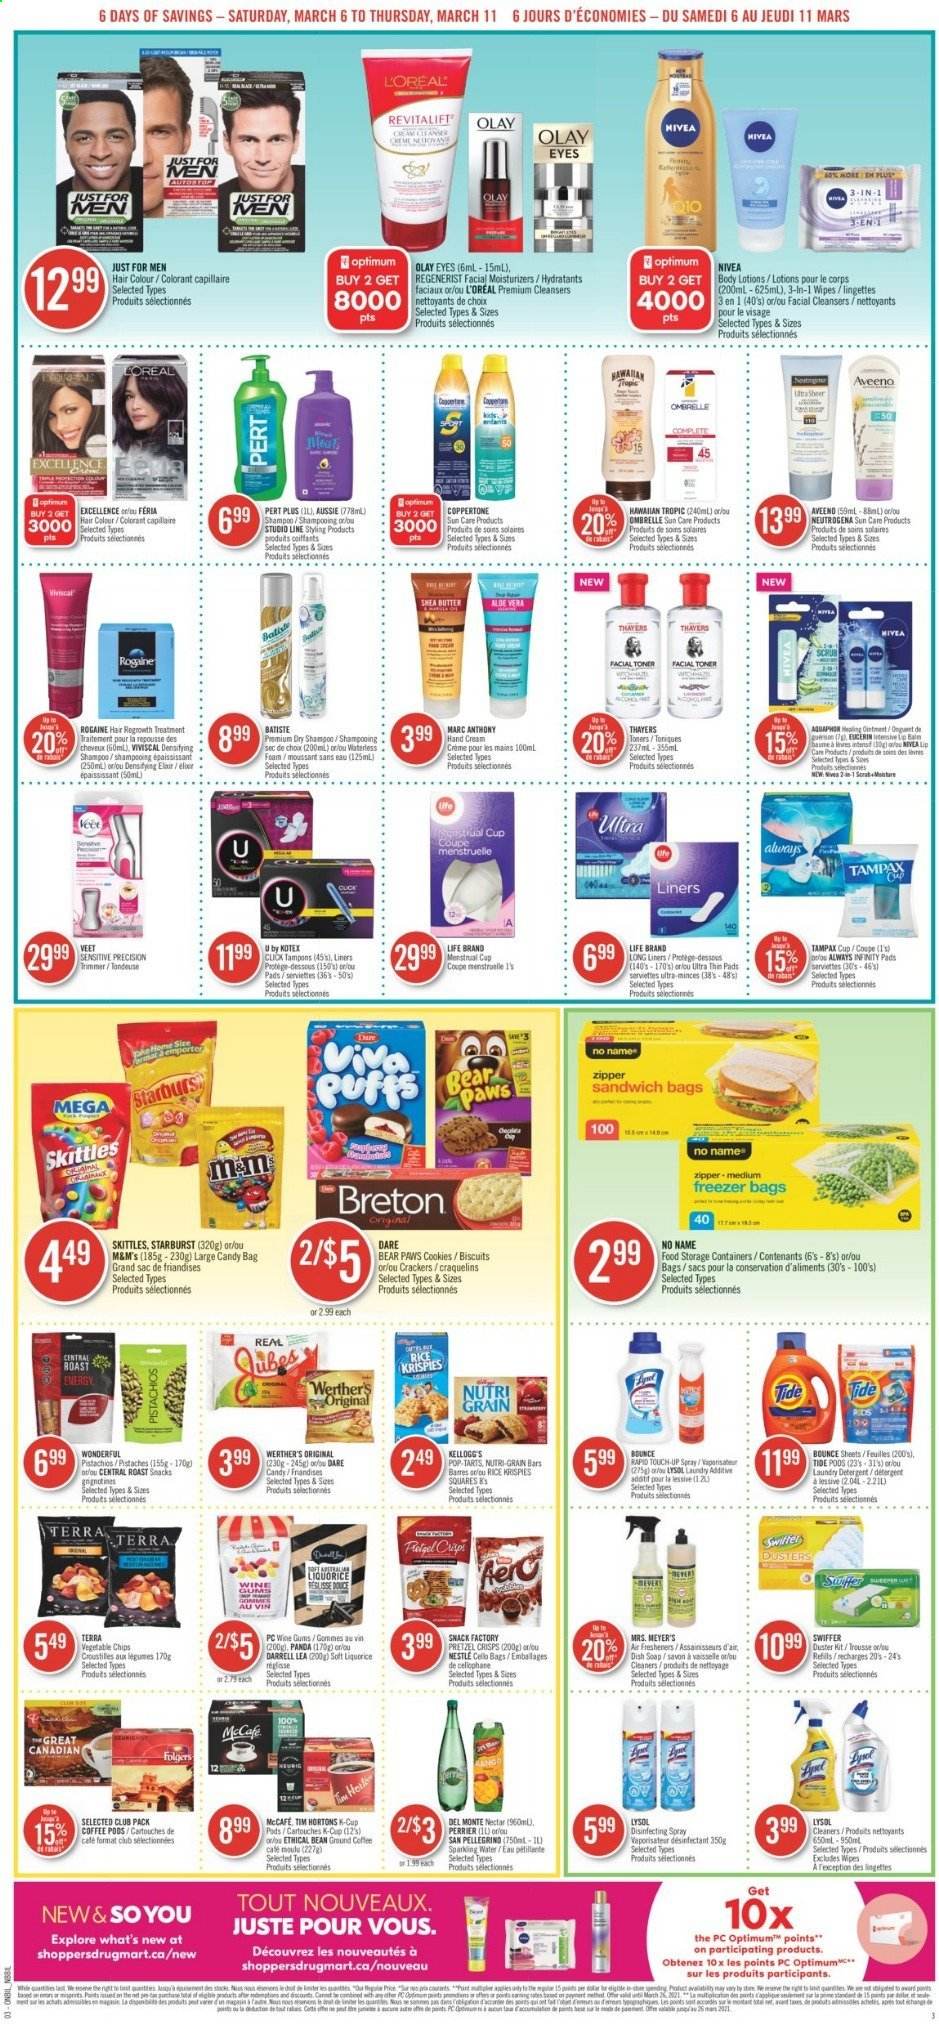 thumbnail - Shoppers Drug Mart Flyer - March 06, 2021 - March 11, 2021 - Sales products - cookies, snack, Mars, crackers, Kellogg's, biscuit, Skittles, Starburst, vegetable chips, pretzel crisps, Rice Krispies, Nutri-Grain, pistachios, Perrier, sparkling water, San Pellegrino, coffee pods, Folgers, coffee capsules, McCafe, K-Cups, Keurig, wipes, Aquaphor, Aveeno, ointment, Lysol, Swiffer, Tide, laundry detergent, Bounce, soap, Kotex, tampons, Always Infinity, L’Oréal, moisturizer, Olay, Aussie, hair color, shea butter, hand cream, Veet, Nestlé, Eucerin, Neutrogena, shampoo, Tampax, Nivea, chips, M&M's. Page 3.